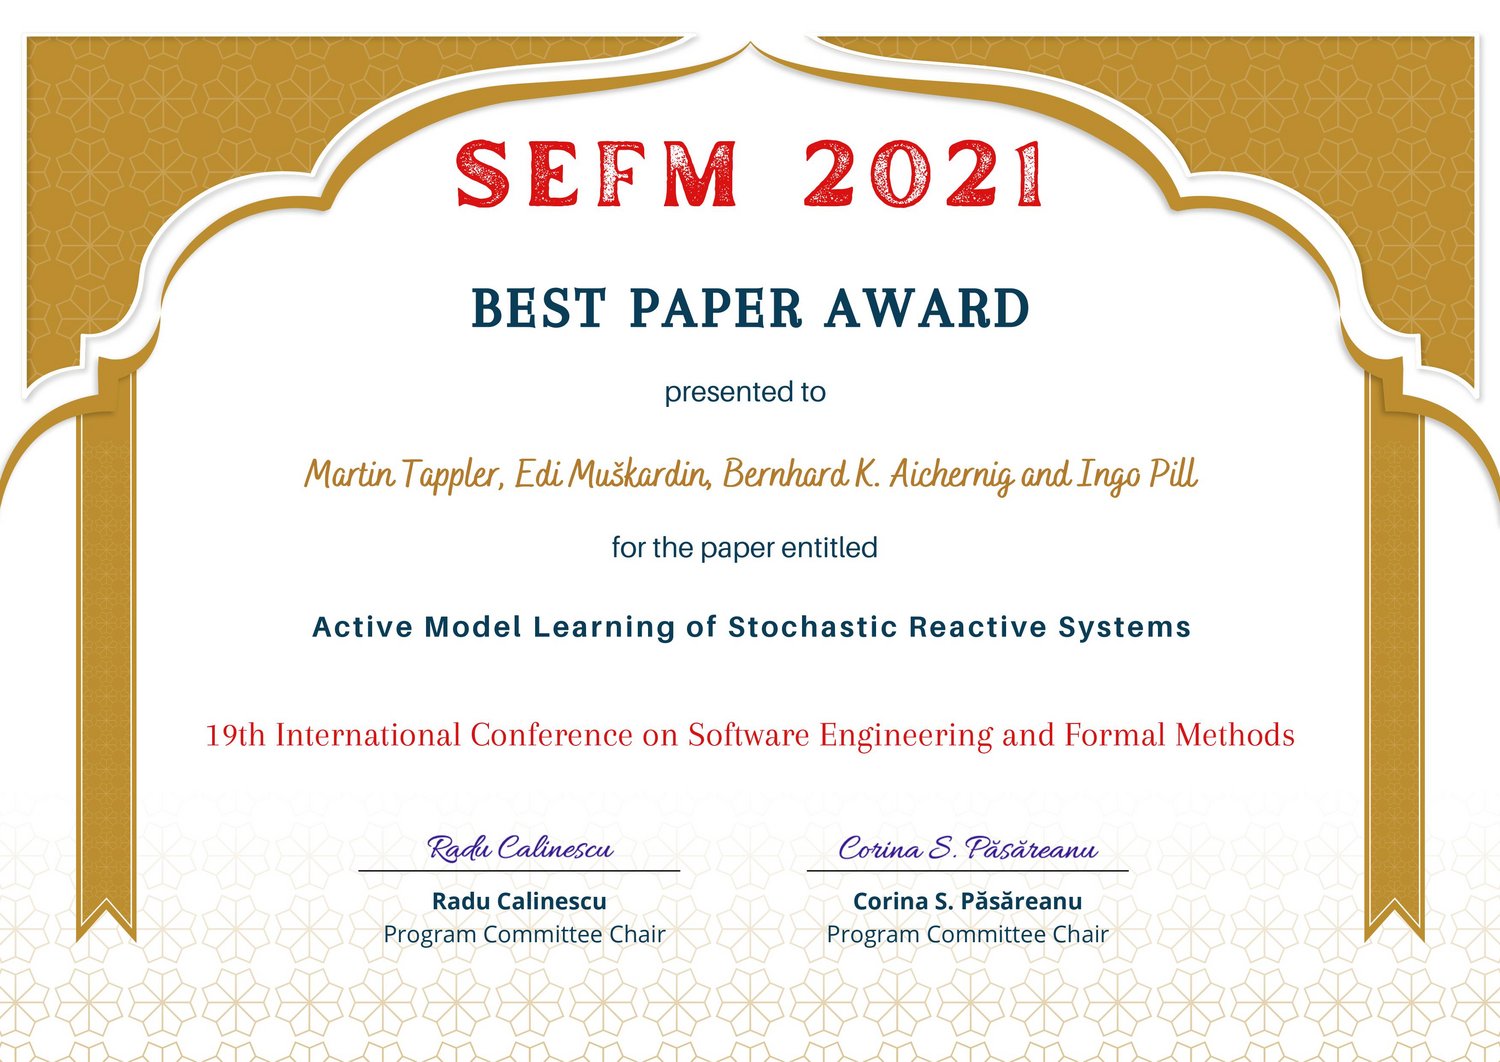 Zertifikat "SEFM 2021 Best Paper Award presented to Martin Tappler, Edi Muskardin, Bernhard K. Aichernig and Ingo Pill for the paper Active Model Learning of Stochastic Reactive Systems. 19th International Conference on Software Engineering and Formal Methods. Radu Calinescu, Program Committee Chair and Corina S. Pasareanu, Program Committee Chair. 